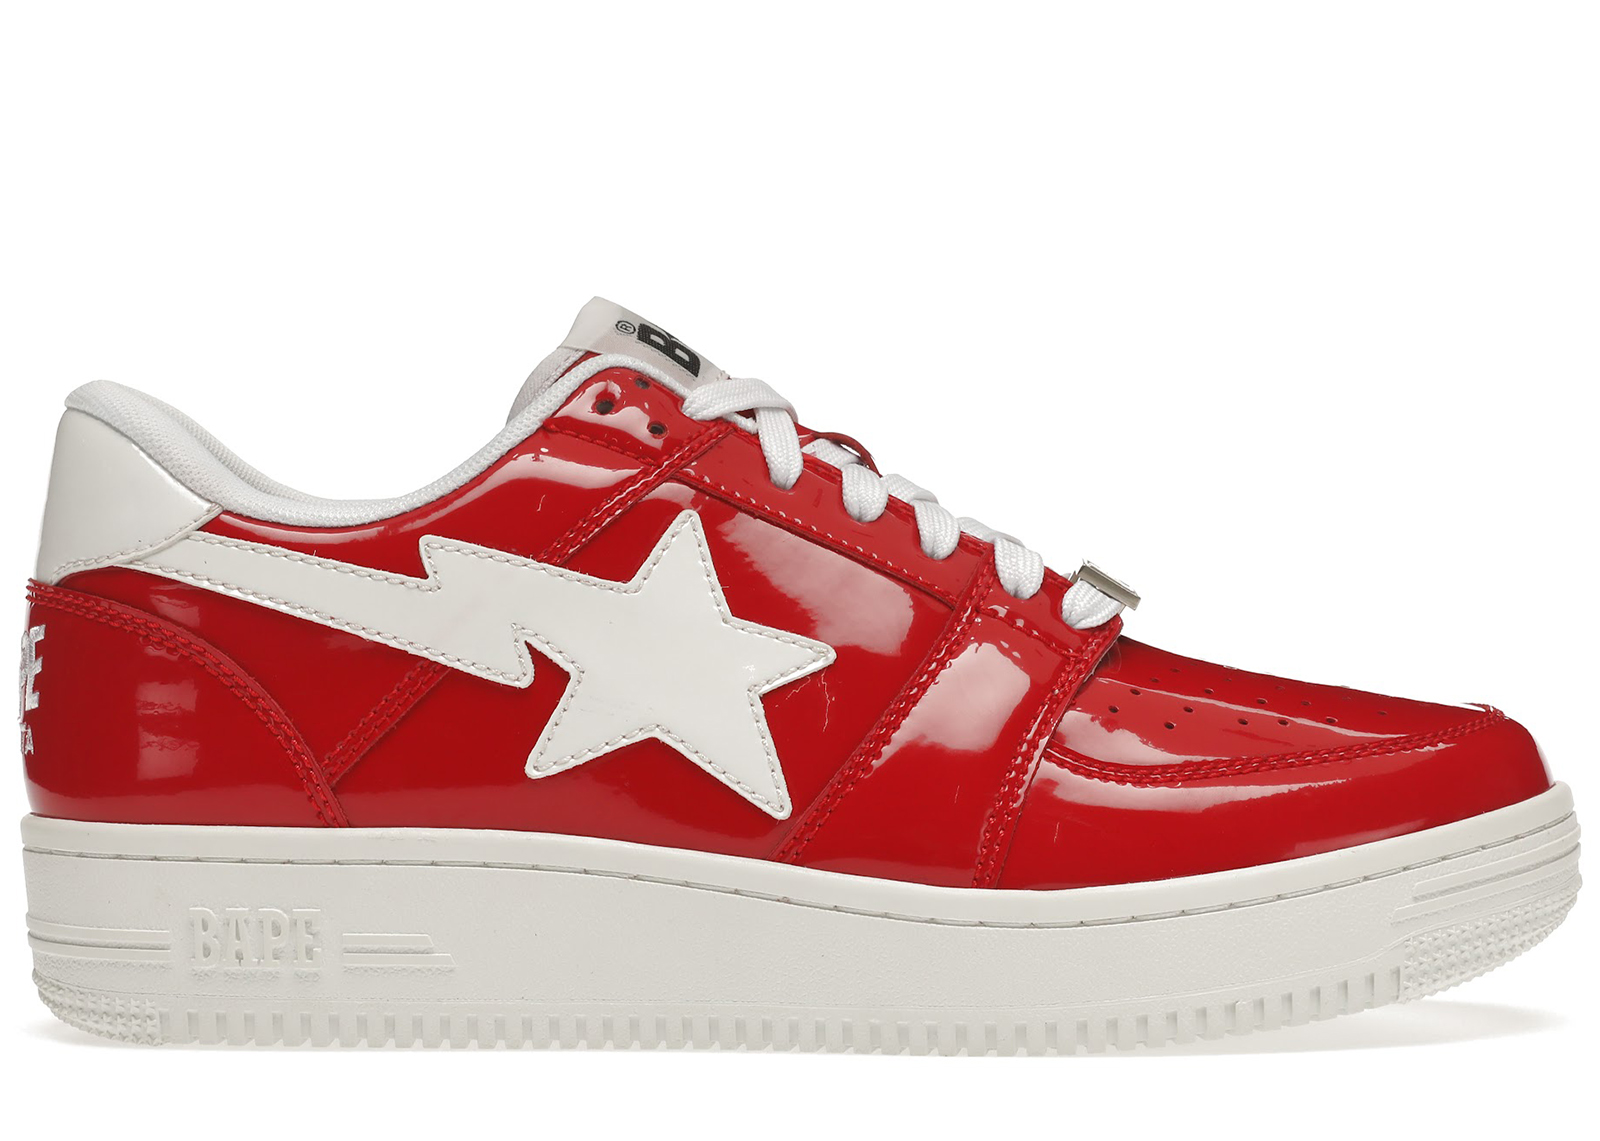 A Bathing Ape Bape Sta Low Patent Red